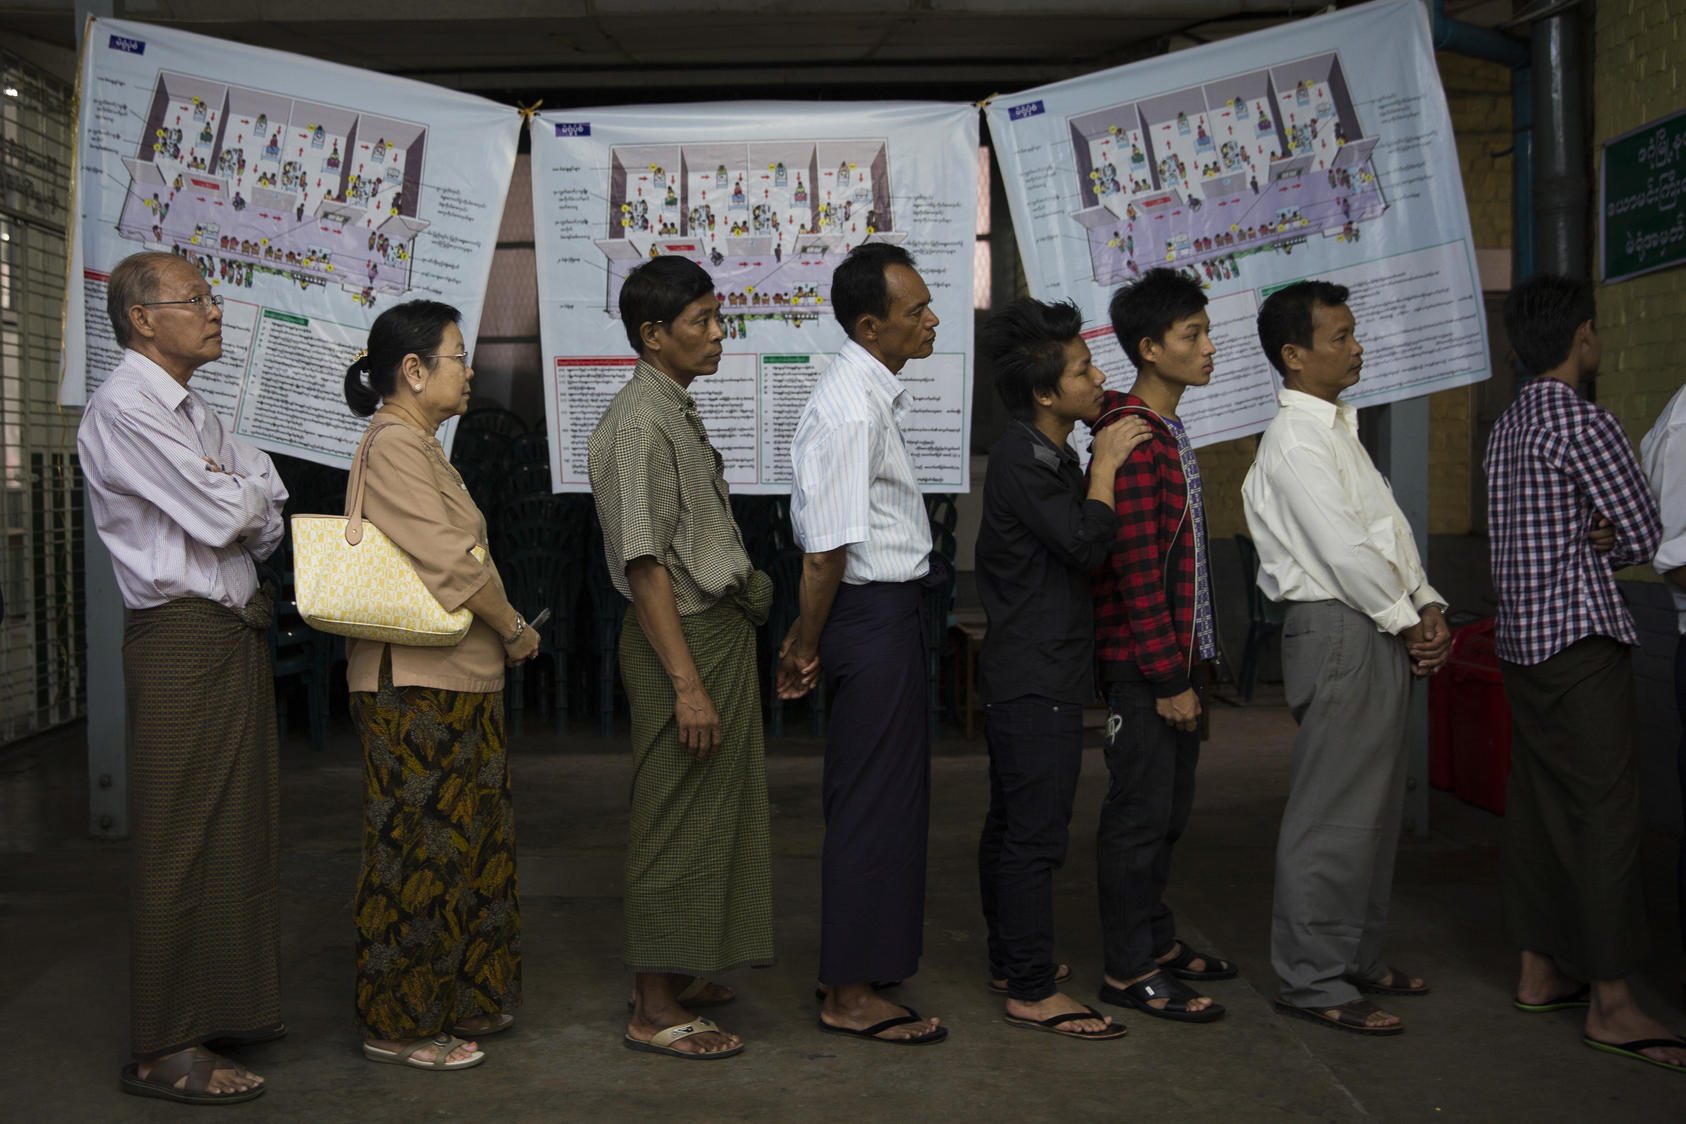 Voters line up at a polling station in Dagon High School in the Dagon township of Yangon, Myanmar, Nov. 8, 2015. The opposition party of the Nobel Peace laureate Aung San Suu Kyi said Monday that it was confident of a sweeping victory in the country’s landmark nationwide elections, while the ruling military-backed party acknowledged its poor showing. 